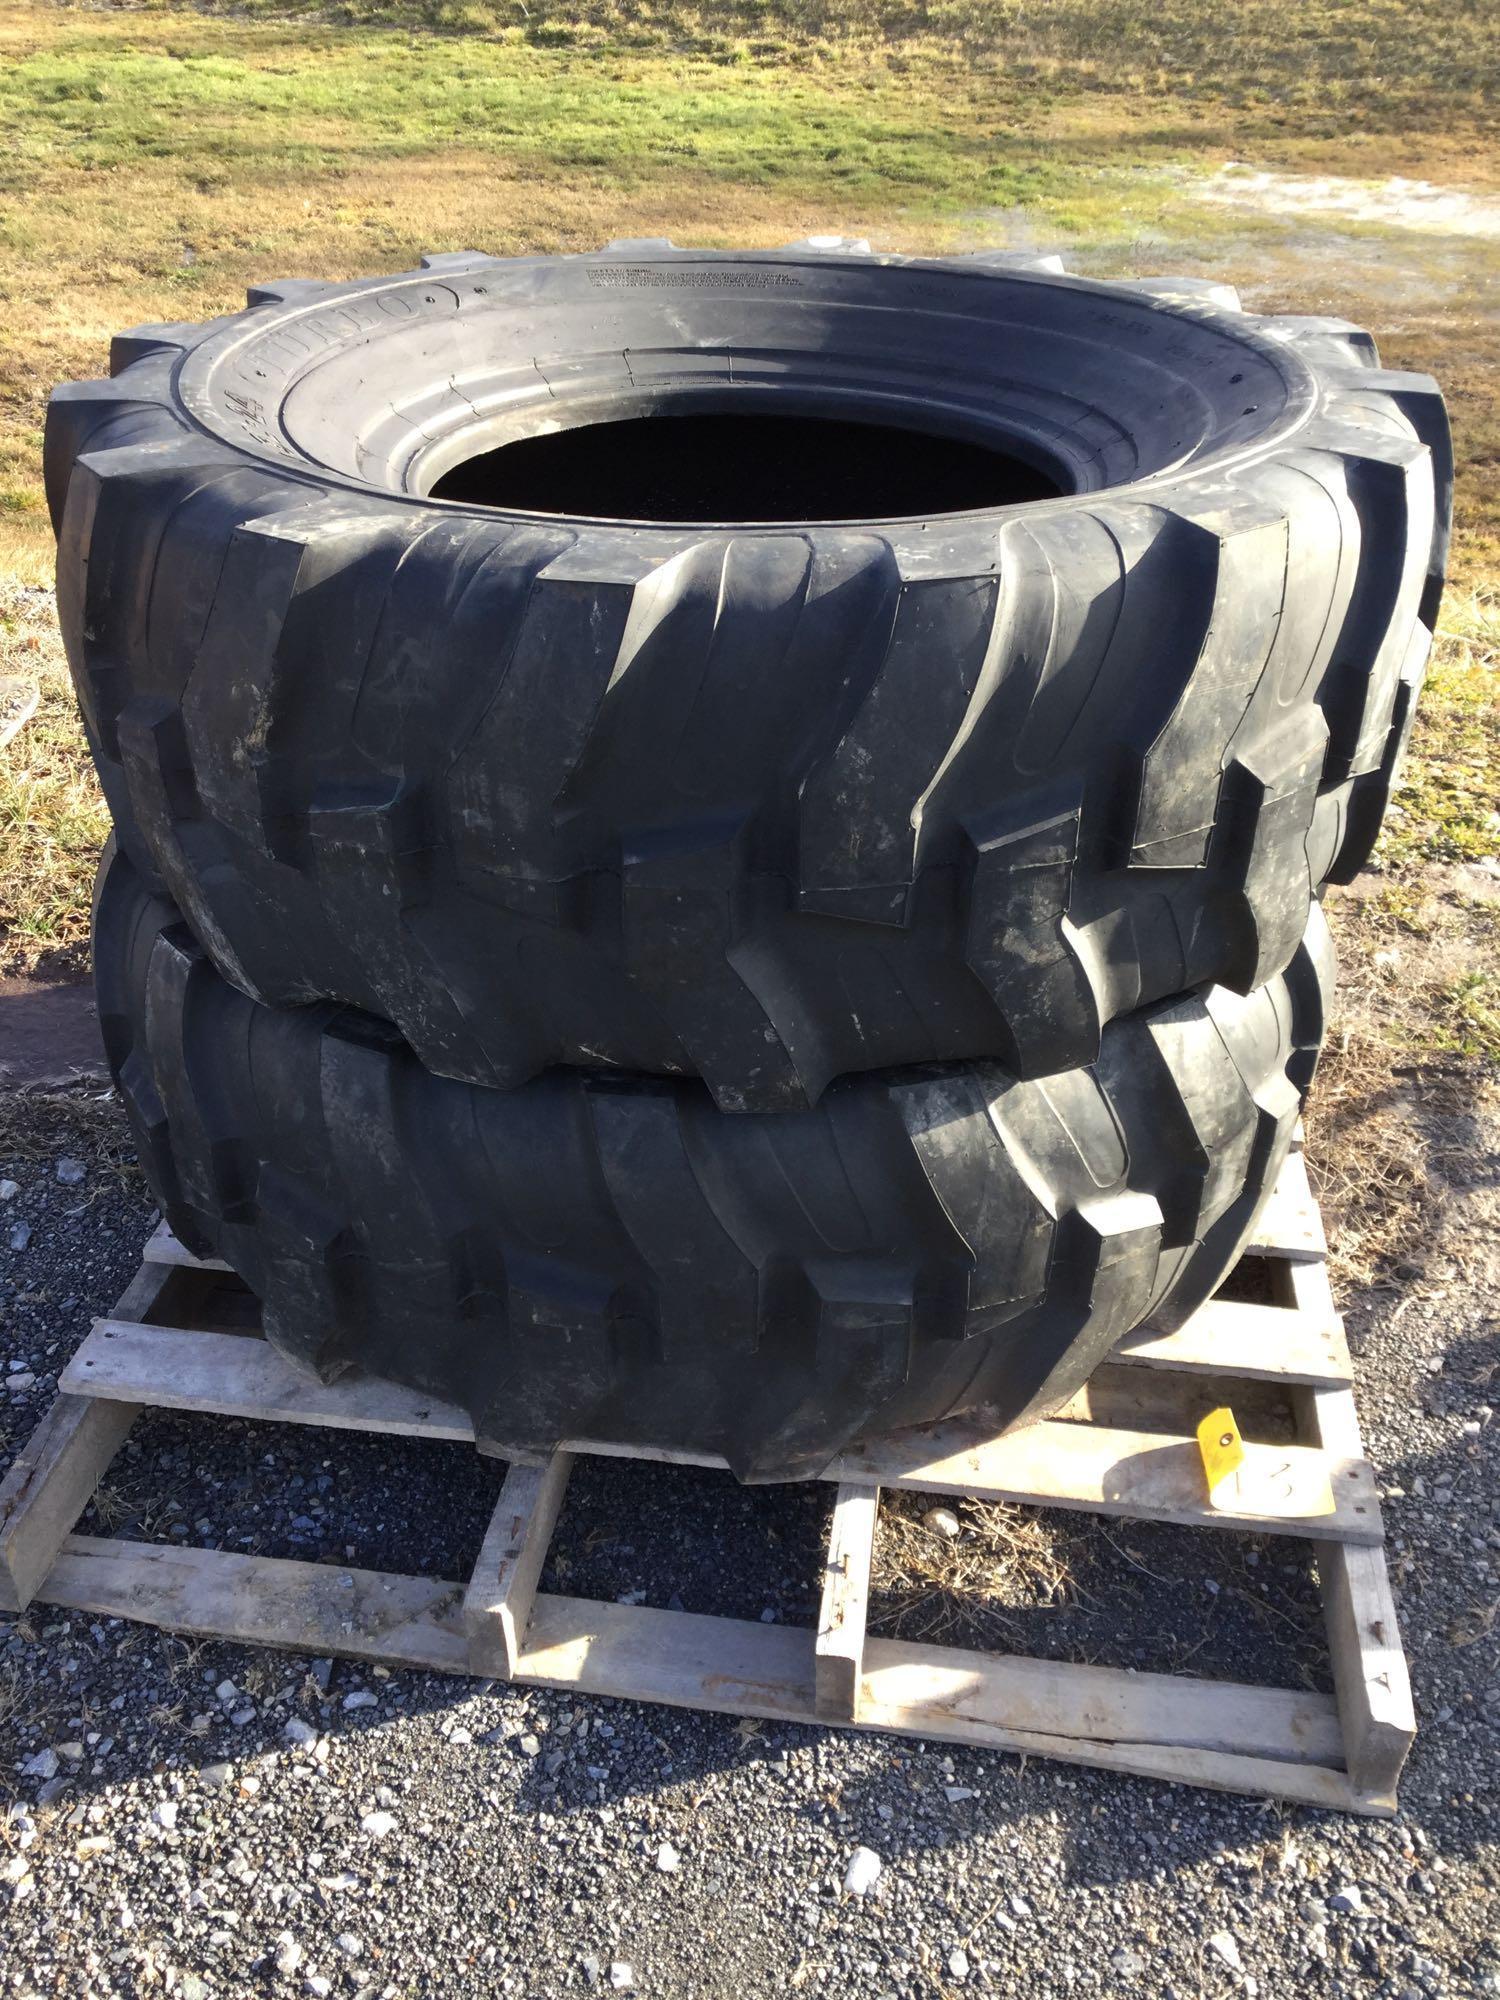 (2) New 19.5L - 24 12ply Tractor Tires